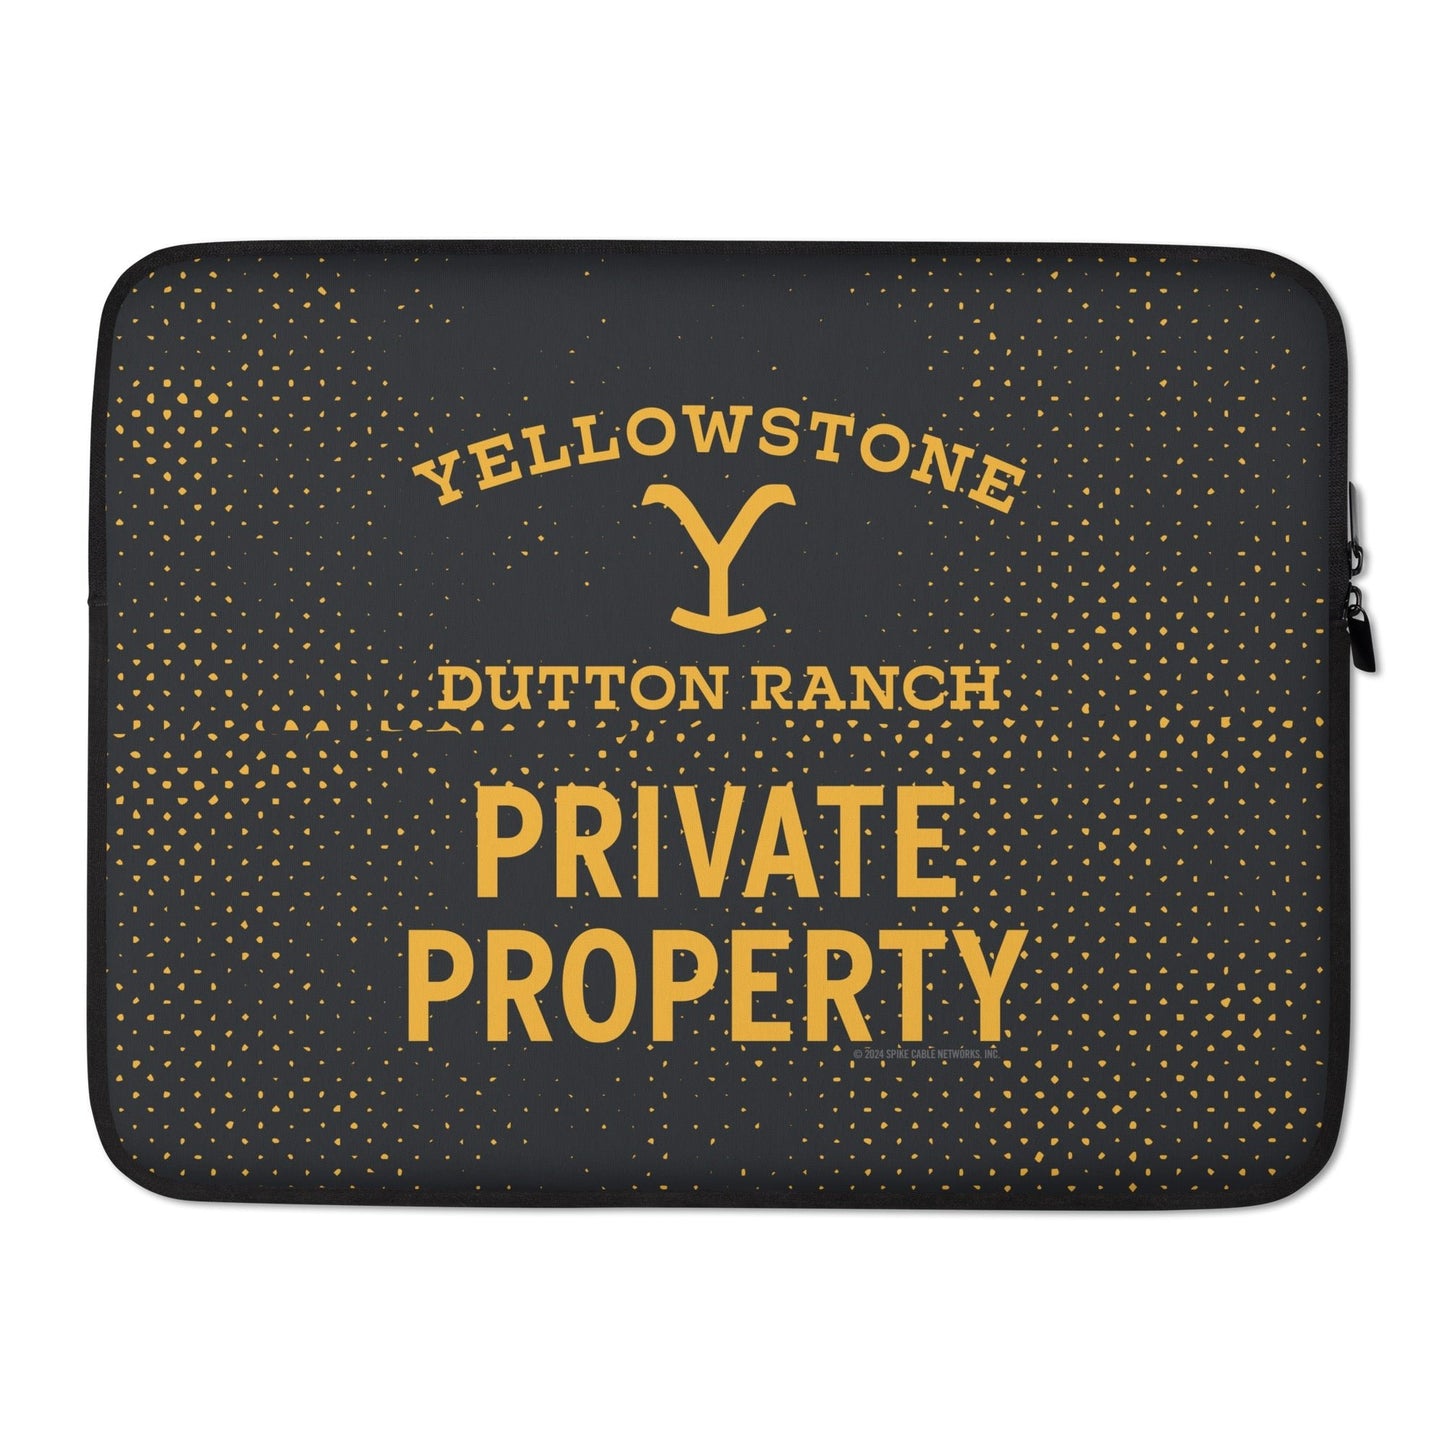 Yellowstone Dutton Ranch Private Property Laptop Sleeve - Paramount Shop